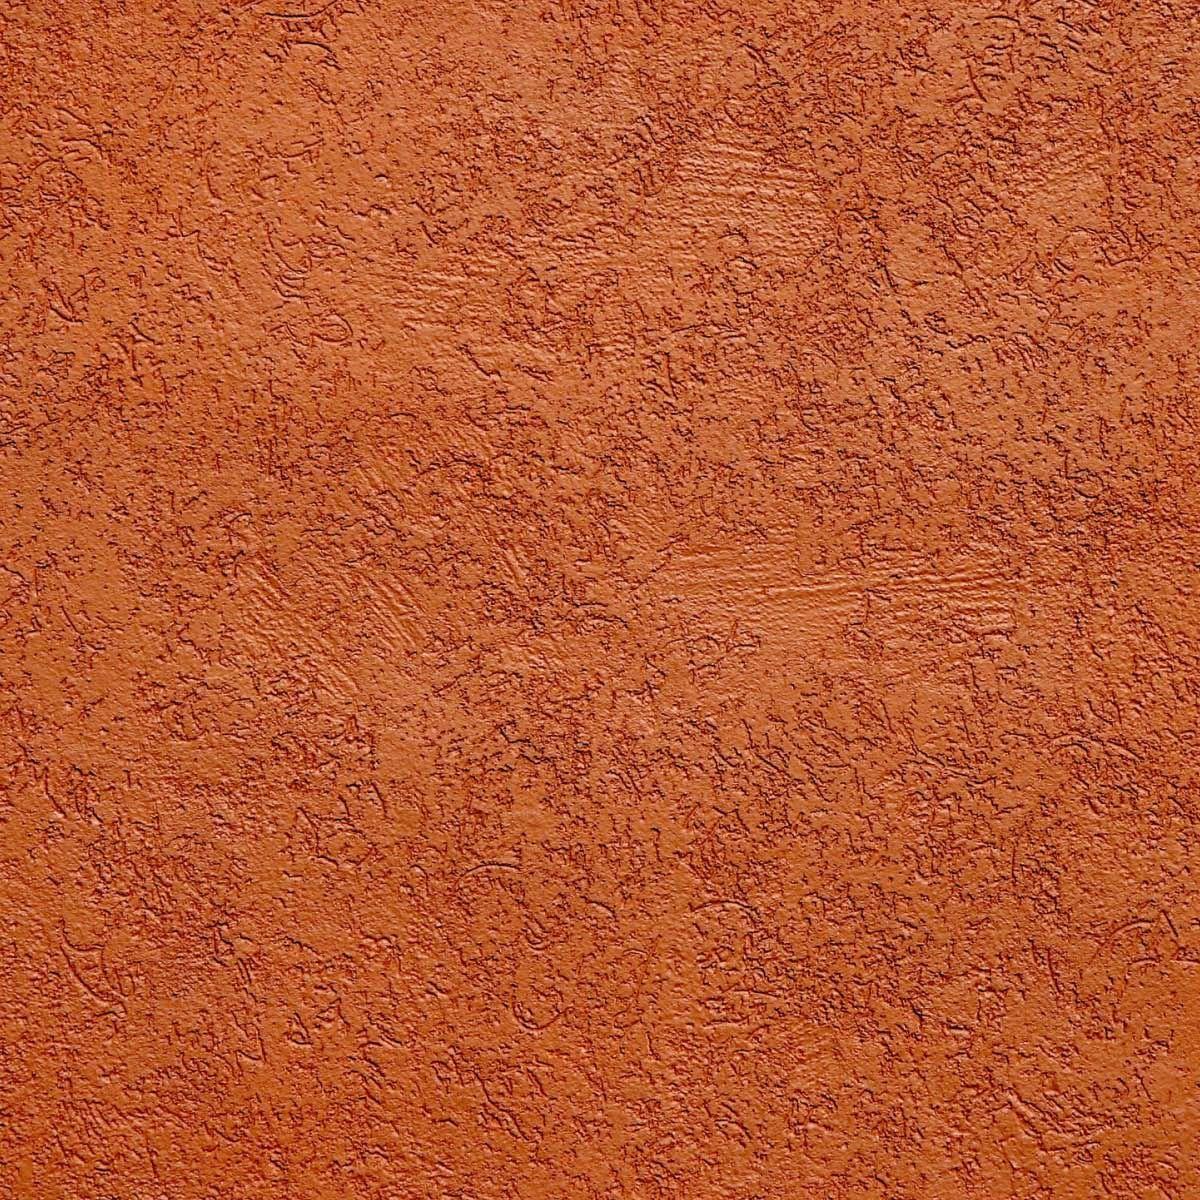 Rust Colored Logo - Rust colored textured stucco wall. Design and Architecture in 2019